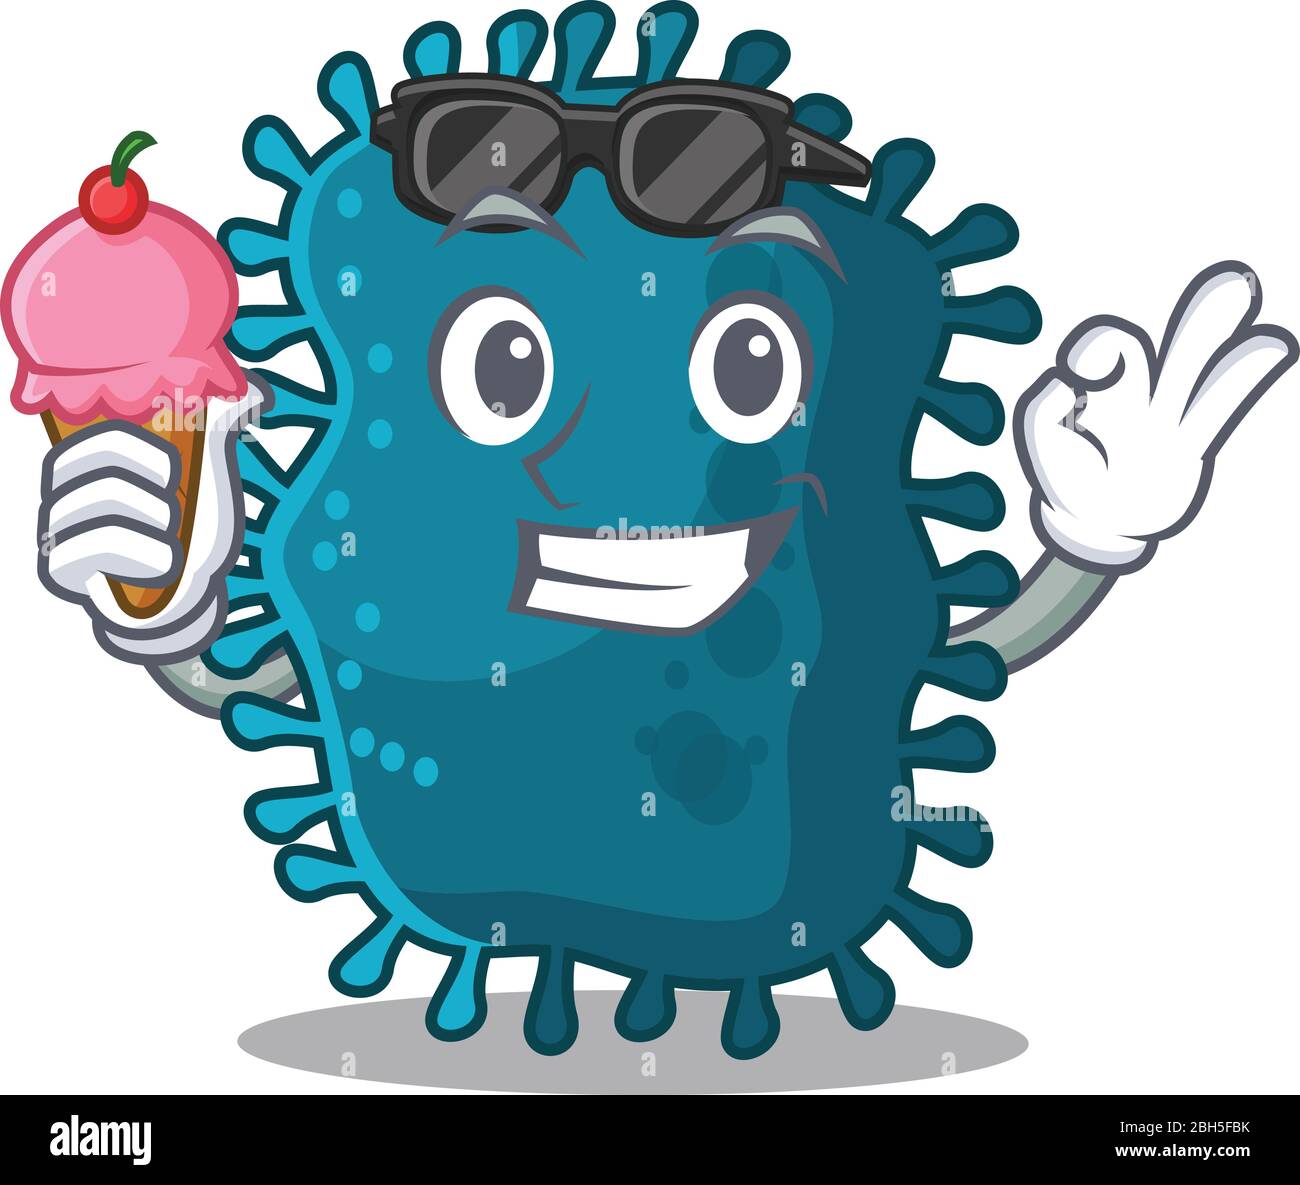 Clostridium Stock Vector Images - Page 2 - Alamy